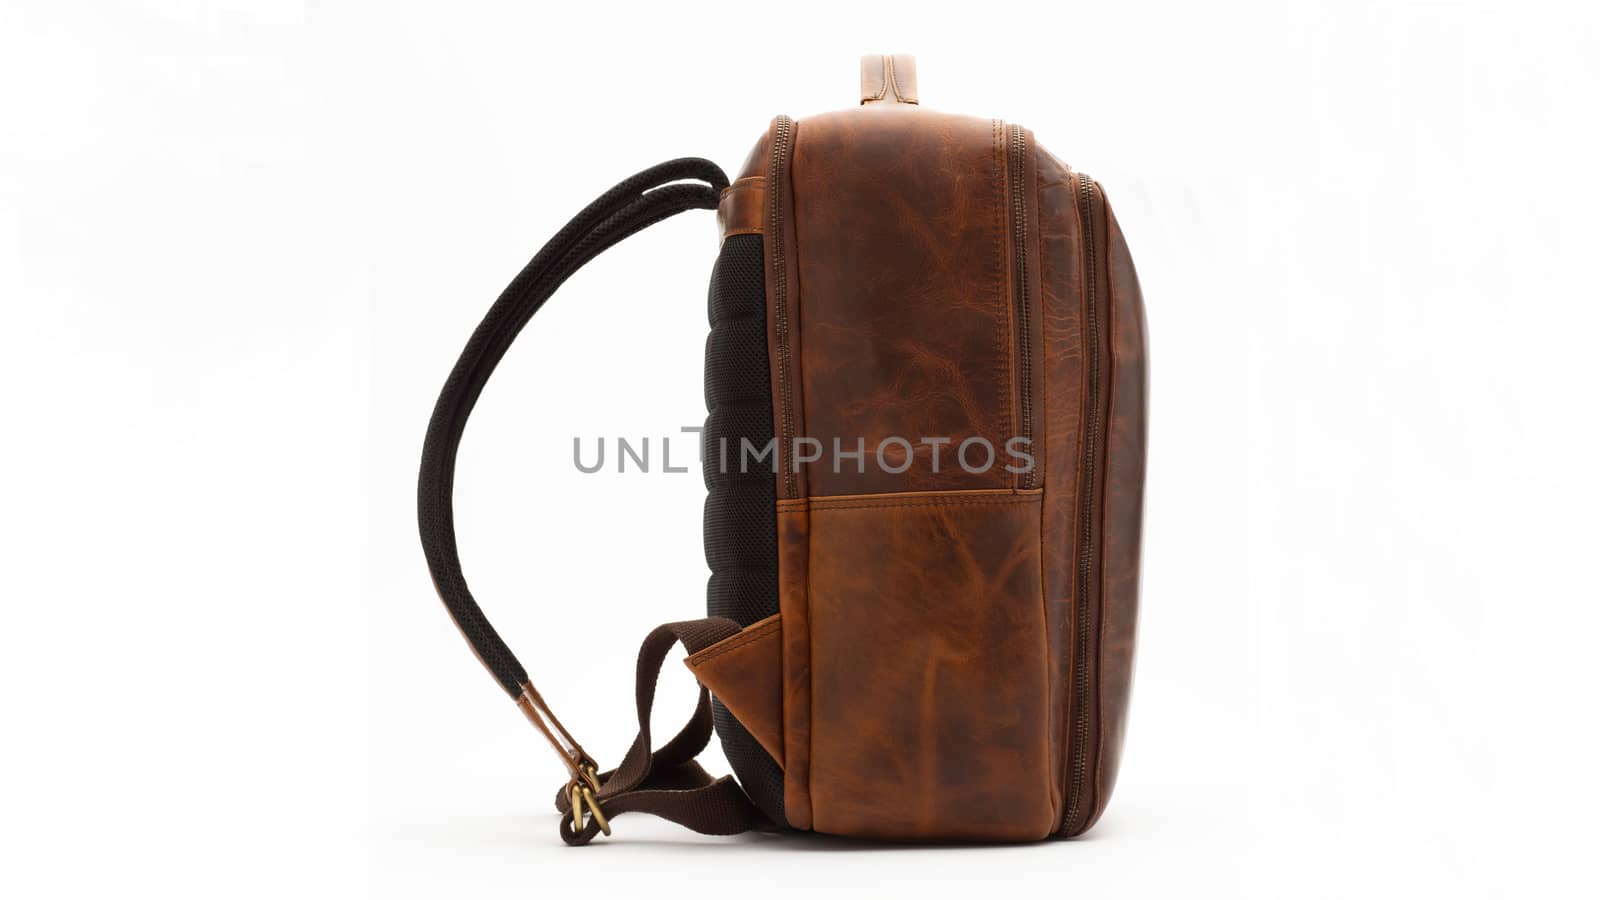 backpack leather bag brown baggage modern fashion accessory design object white background